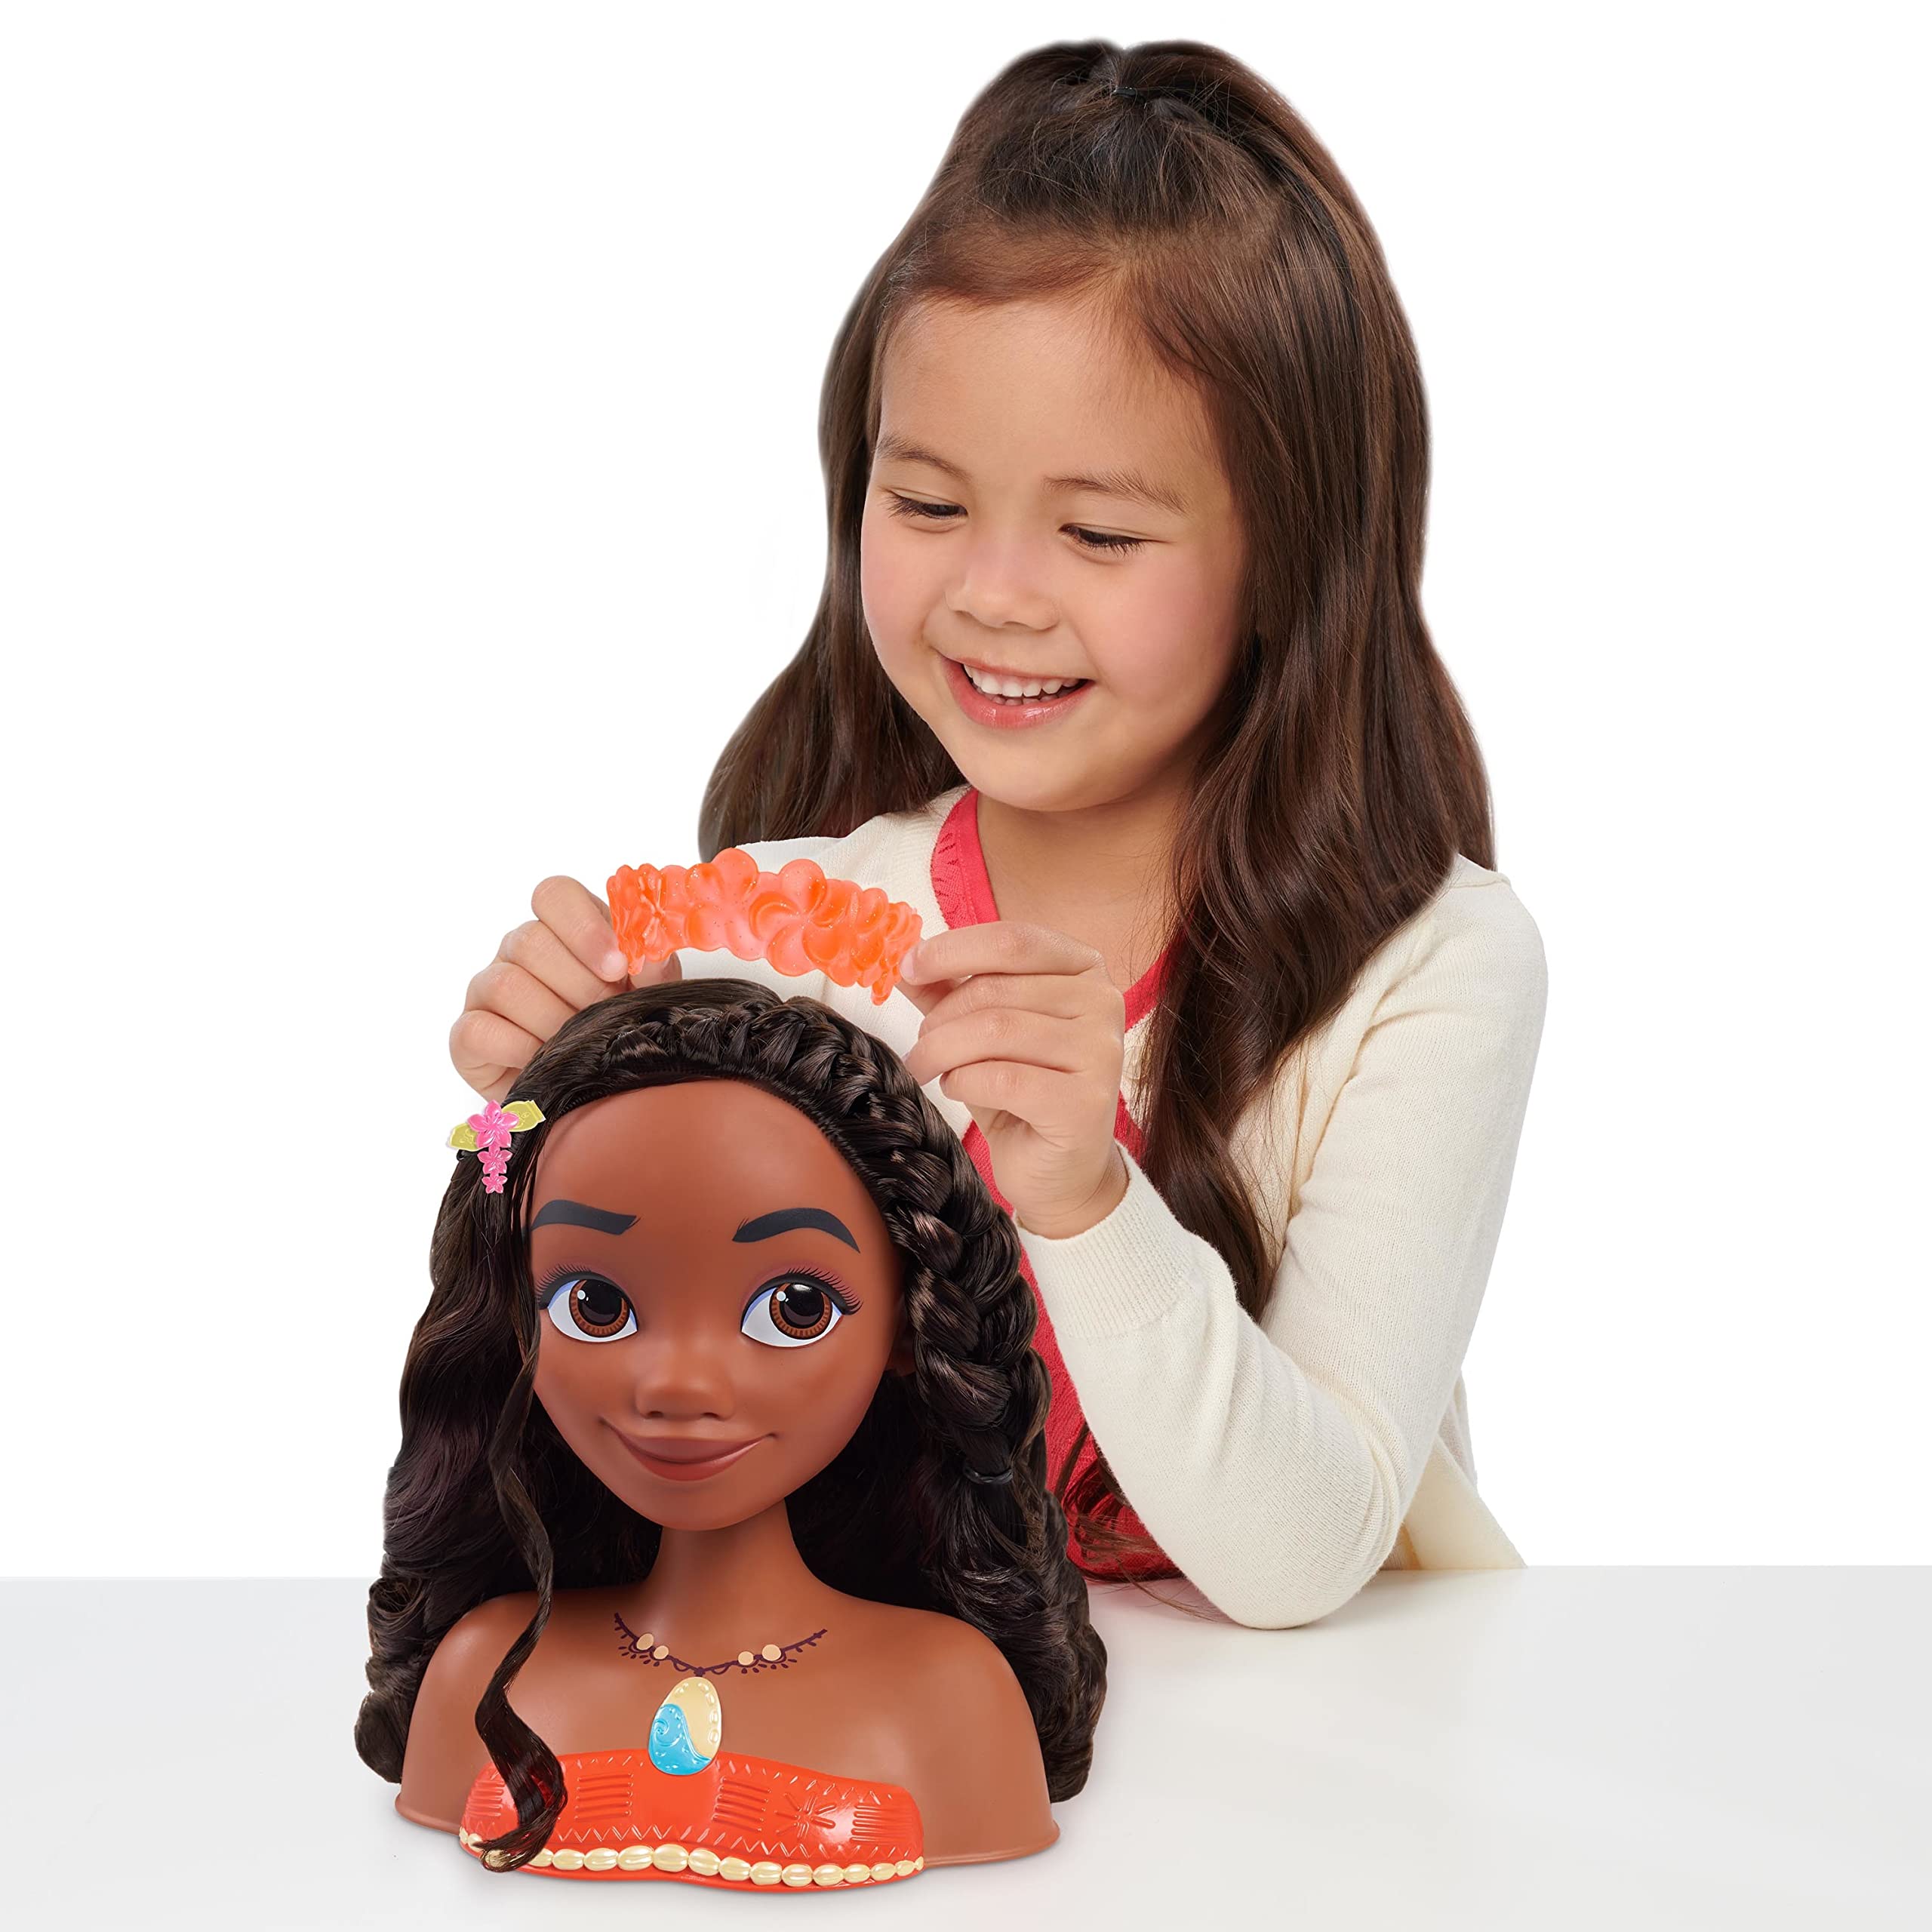 Disney Princess Moana Styling Head, 18-Pieces, Pretend Play, Officially Licensed Kids Toys for Ages 3 Up by Just Play